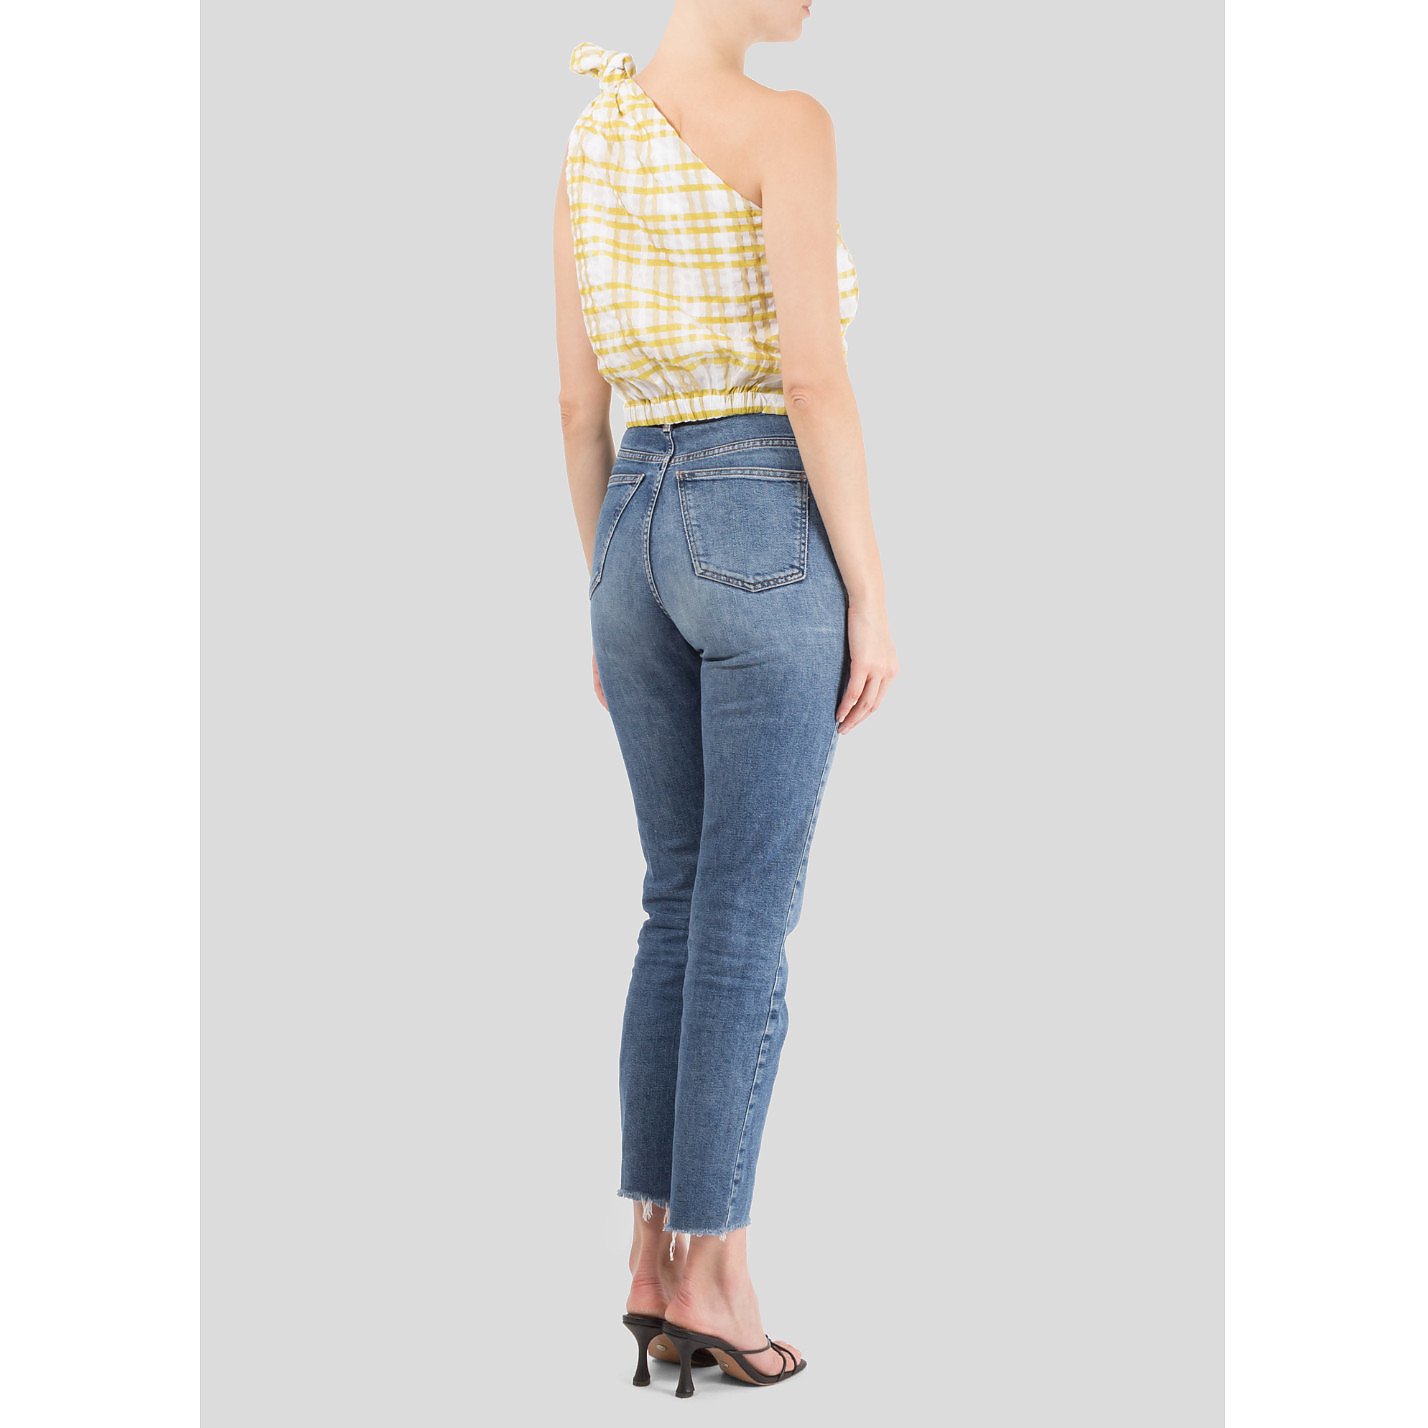 Rosie Assoulin Checked One Shoulder Top